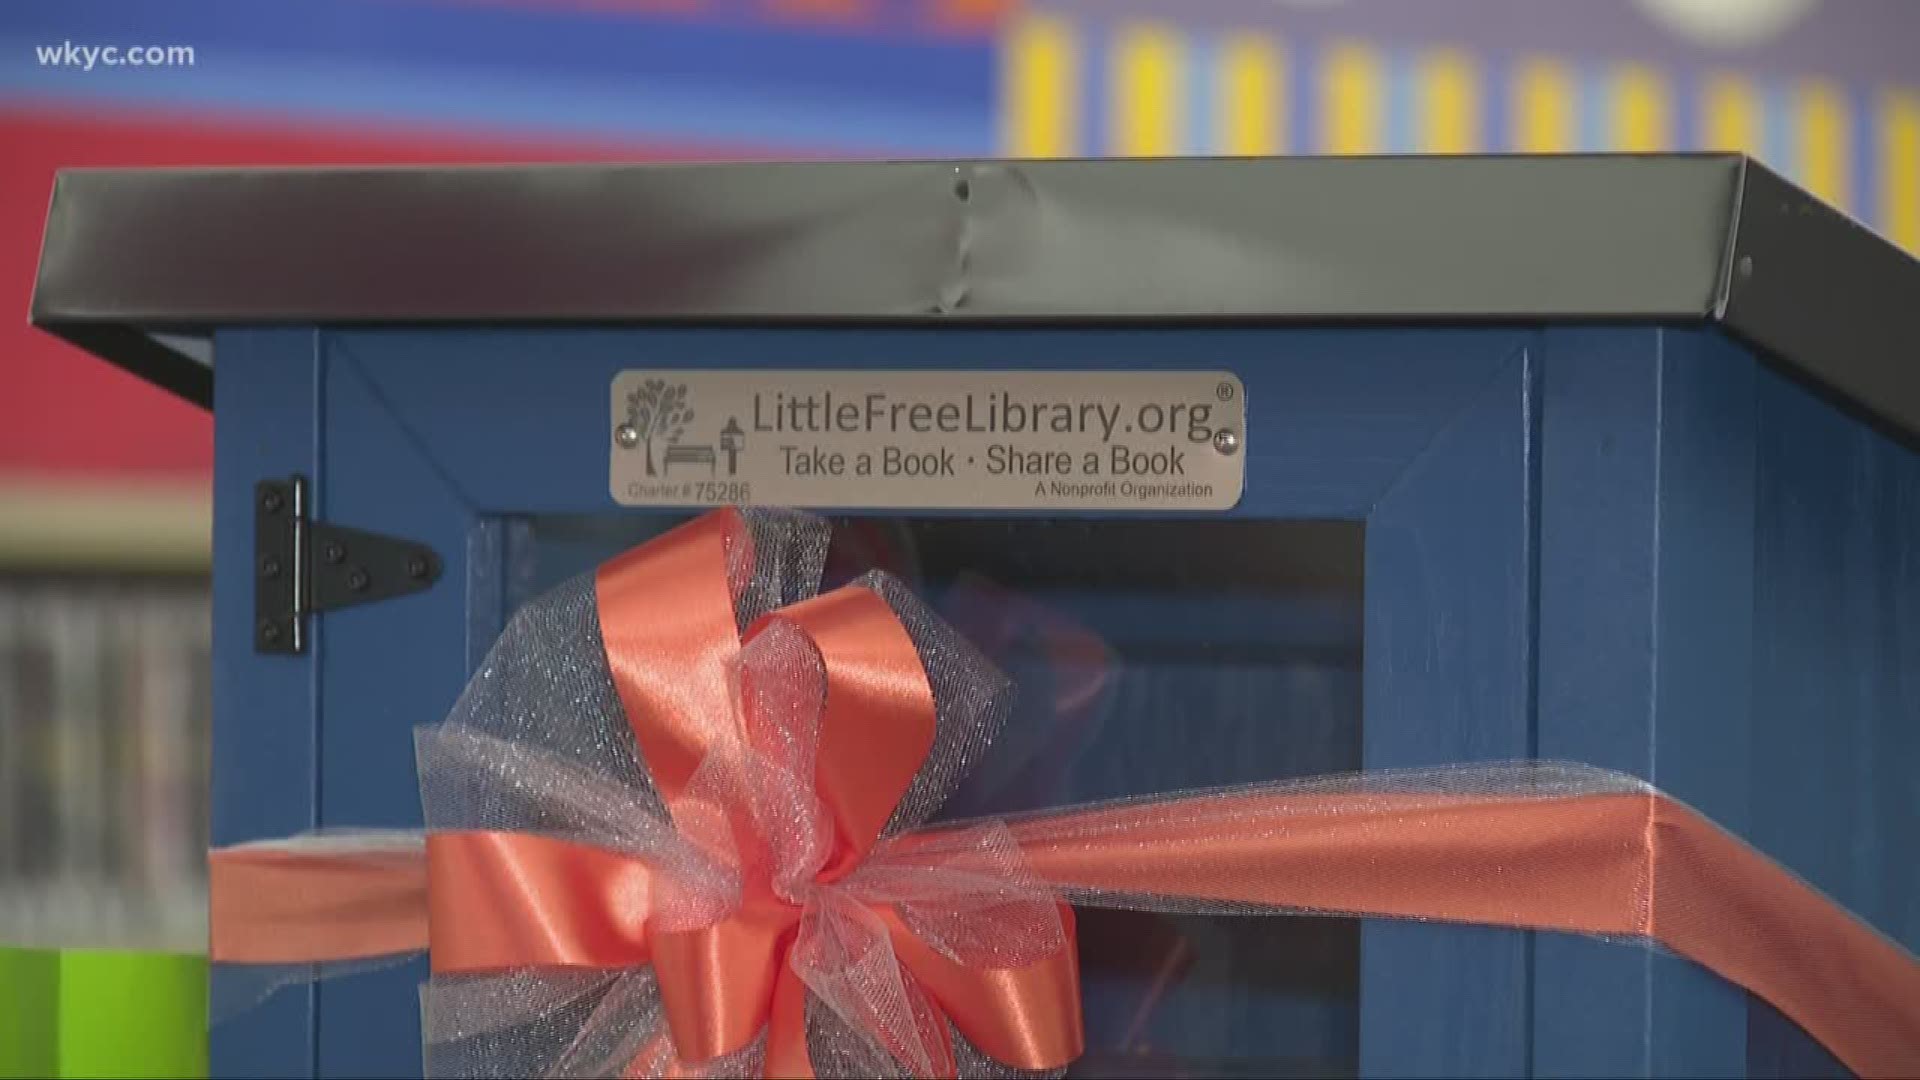 Cleveland's Central neighborhood now has six Little Free Libraries.